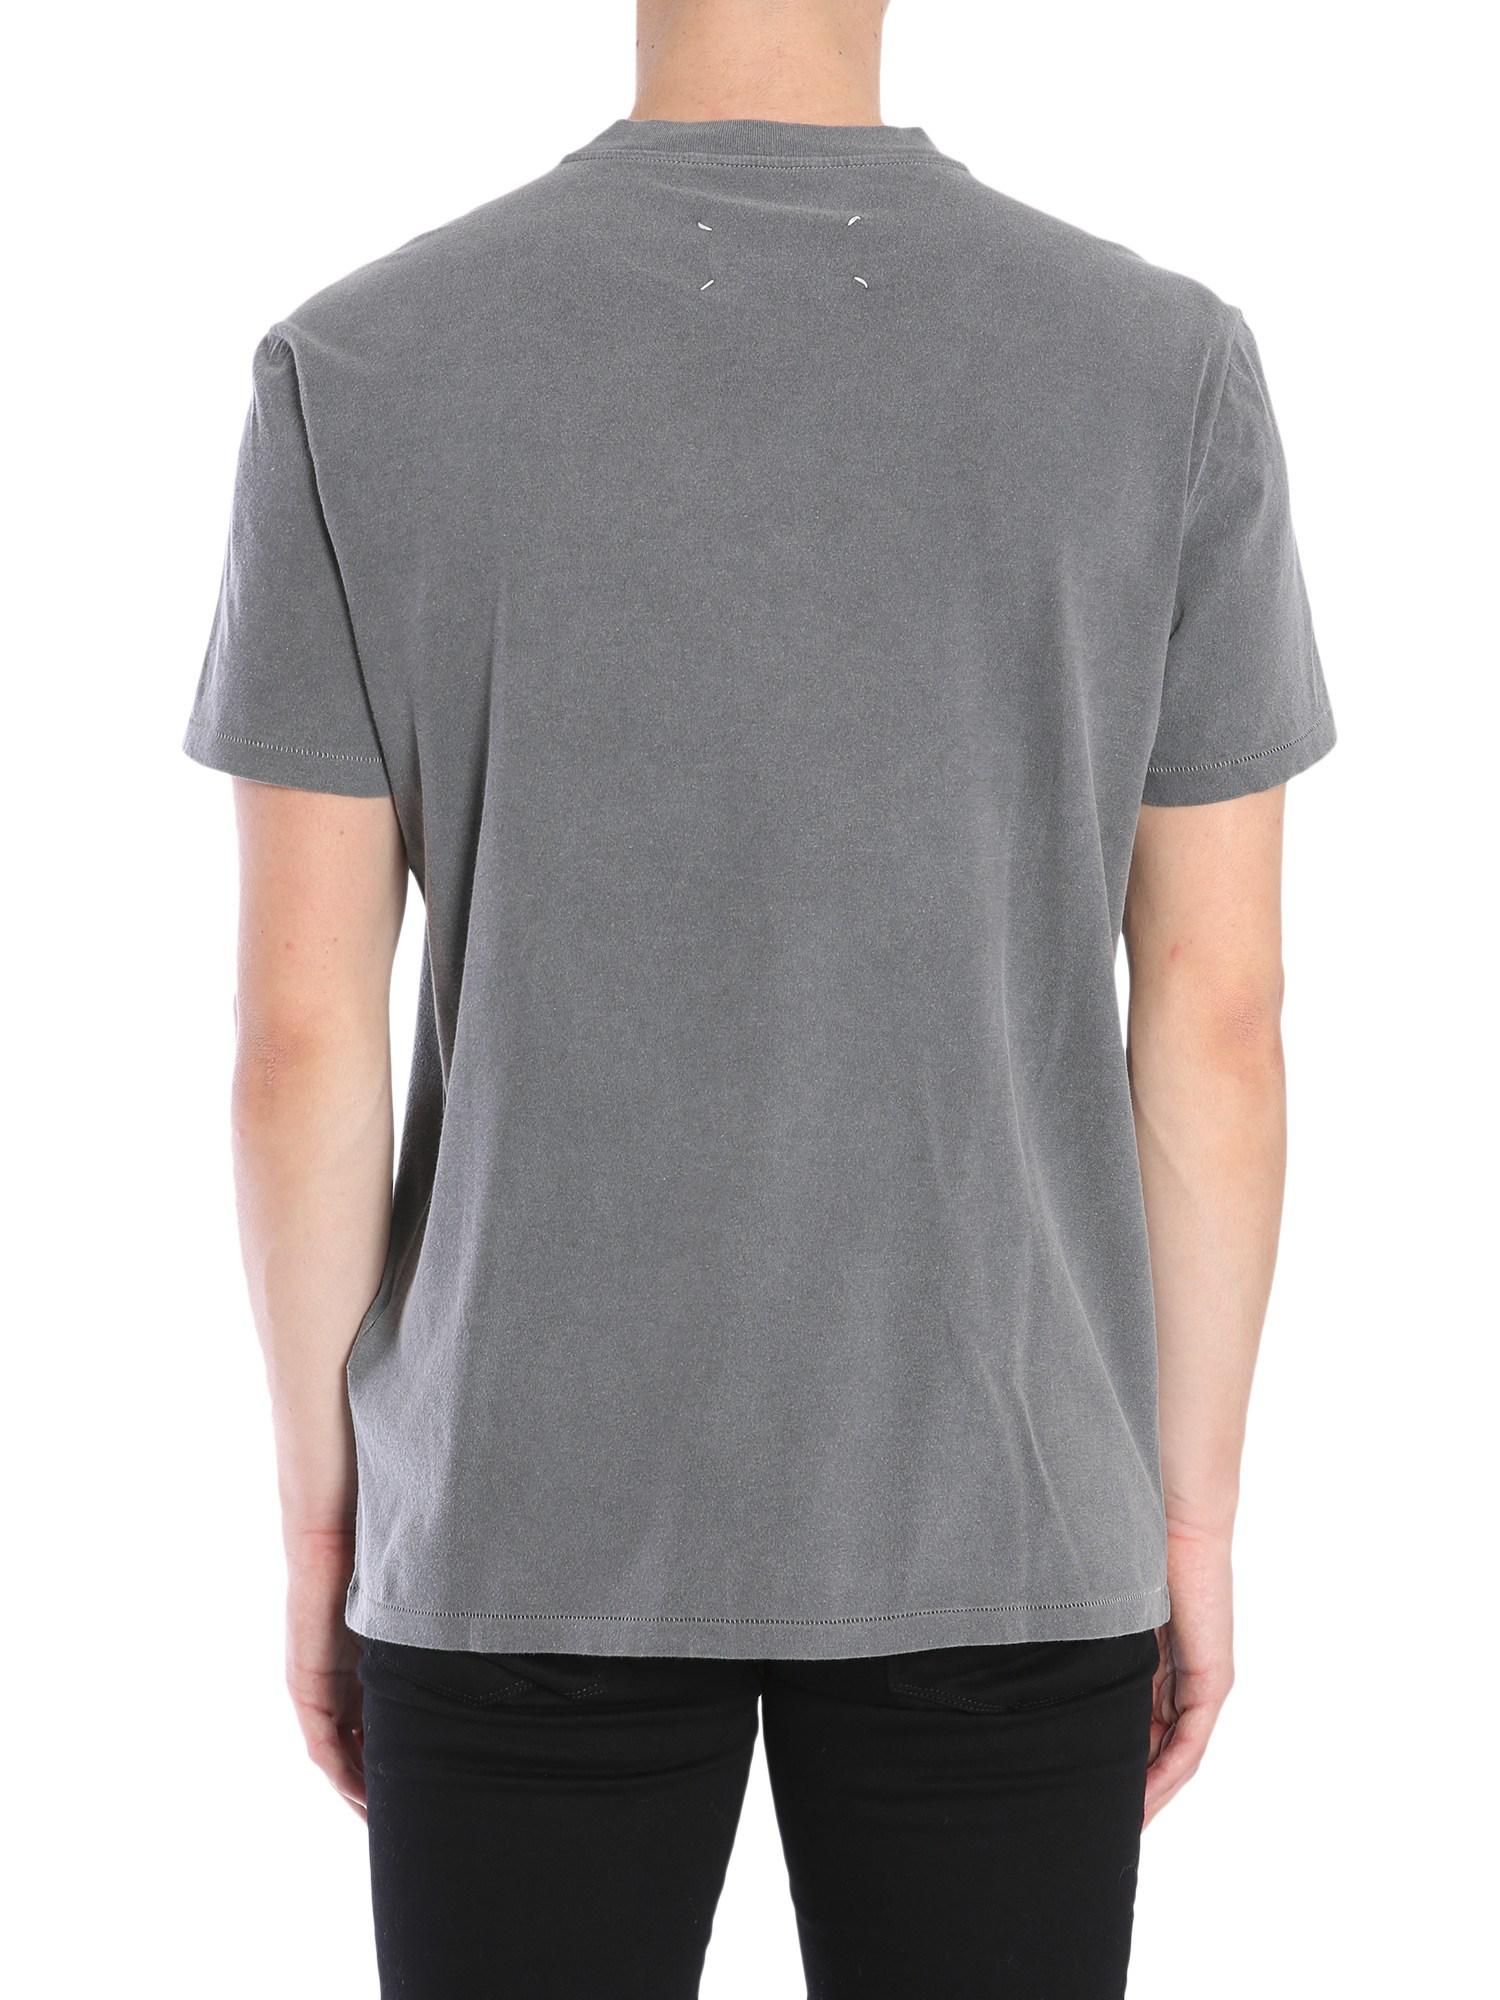 Lyst - Maison Margiela Printed Round Collar Cotton T-shirt in Gray for Men